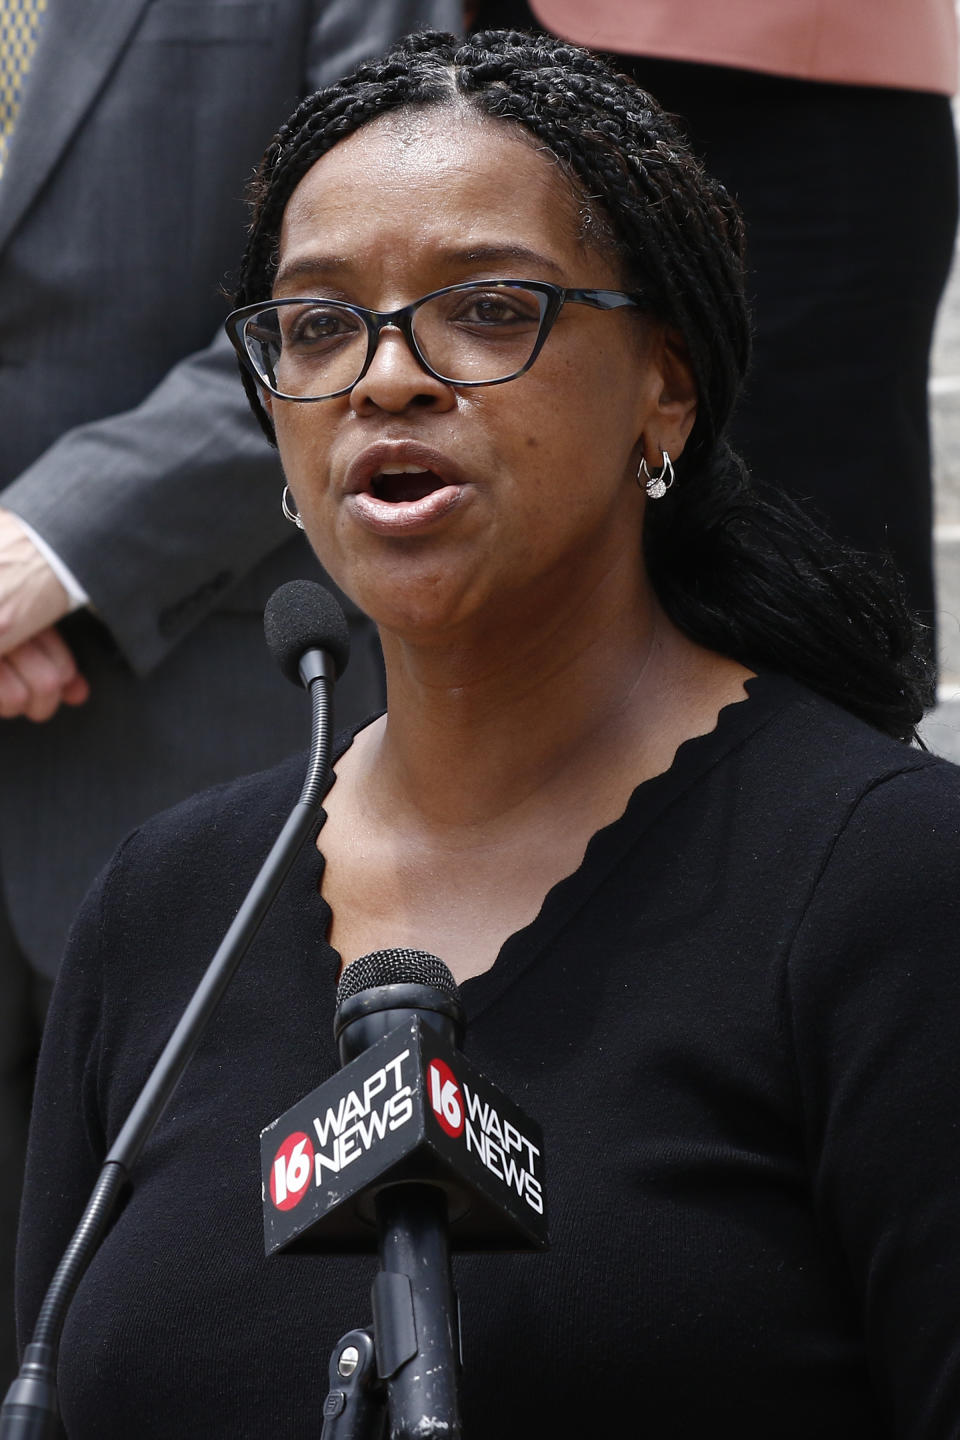 Sen. Angela Turner Ford, D-West Point, chairwoman of the Mississippi Legislative Black Caucus, expresses the group's approval of the passage by the Legislature of legislation to take down and replace the current state flag which contains the Confederate battle emblem, during a news conference at the Capitol in Jackson, Miss., Monday, June 29, 2020. (AP Photo/Rogelio V. Solis)